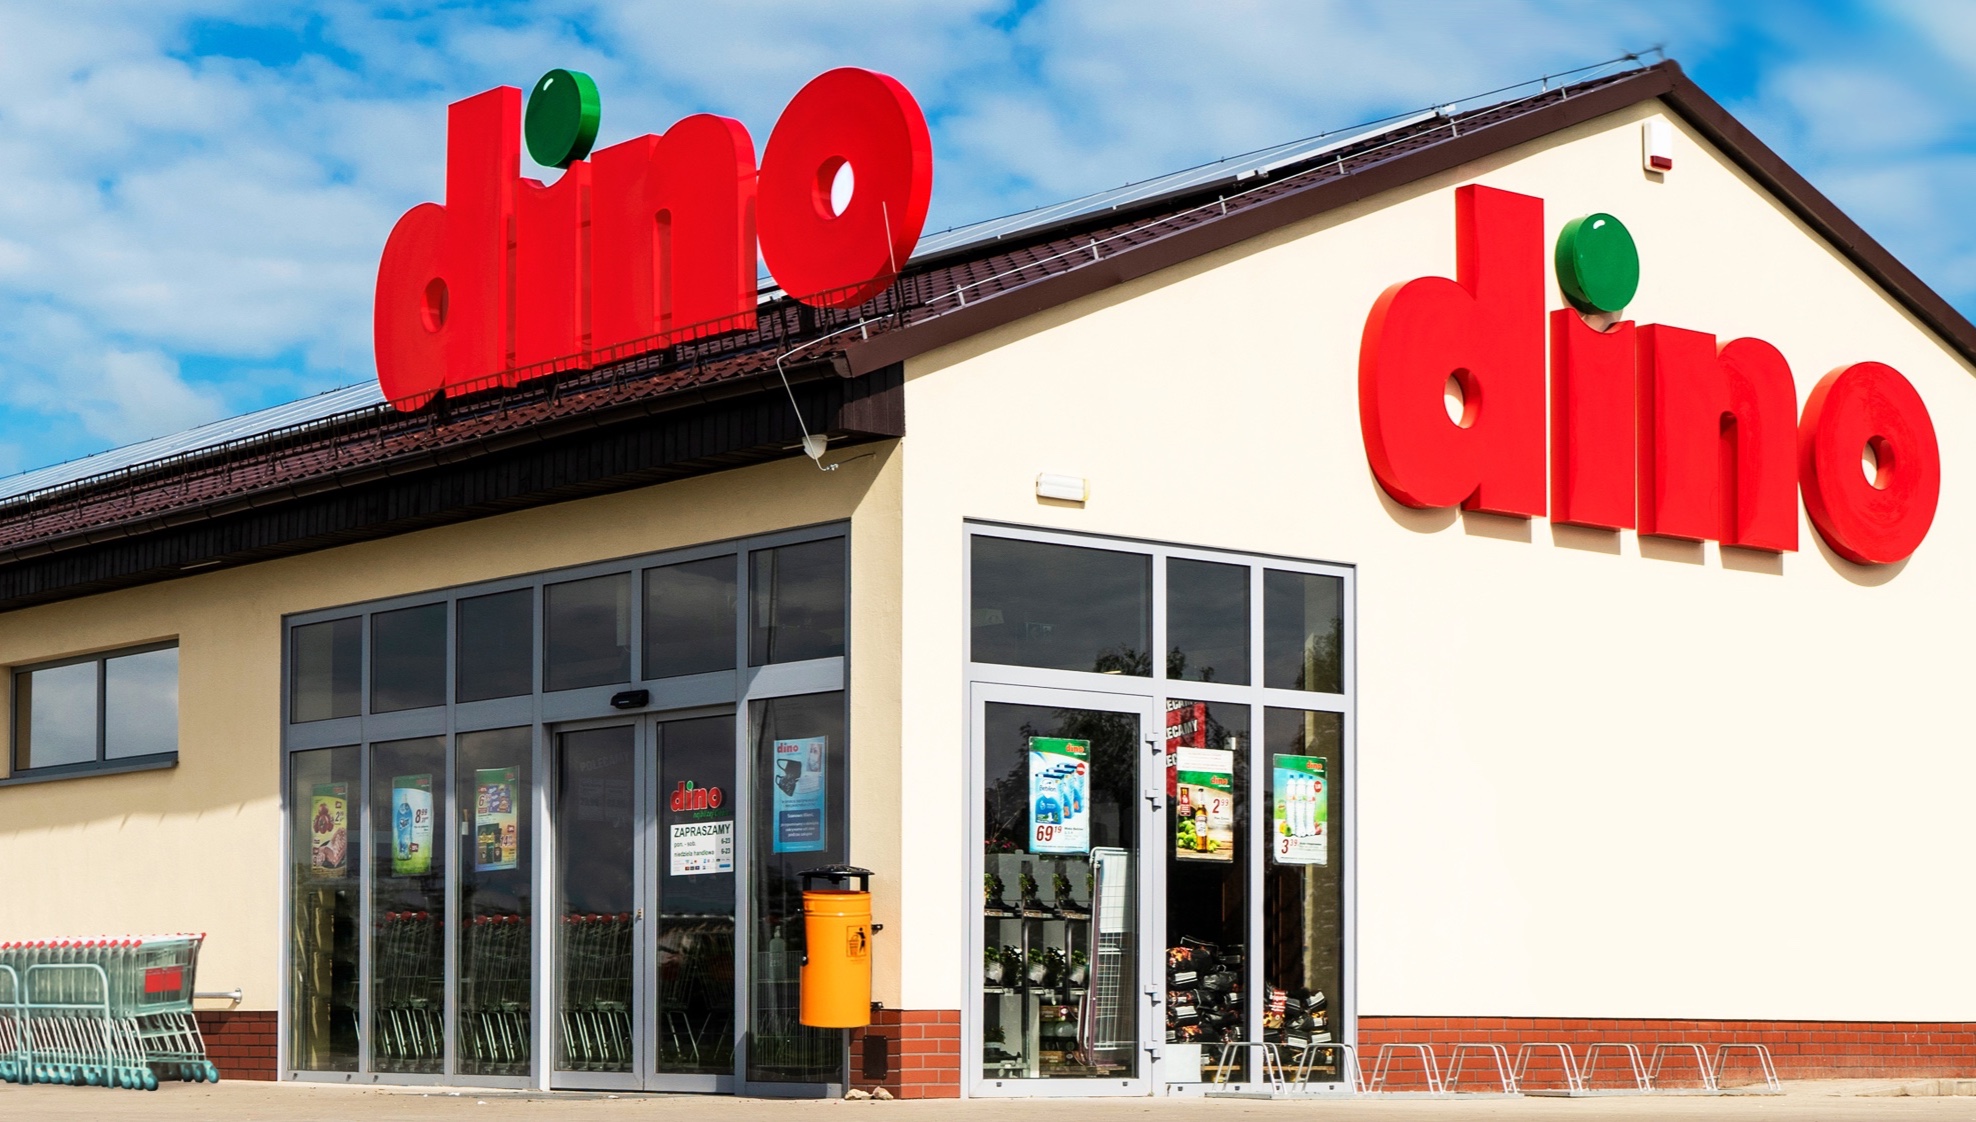 The chain of Dino shops challenges its competitors. The company of the richest Pole has already overtaken the German giant